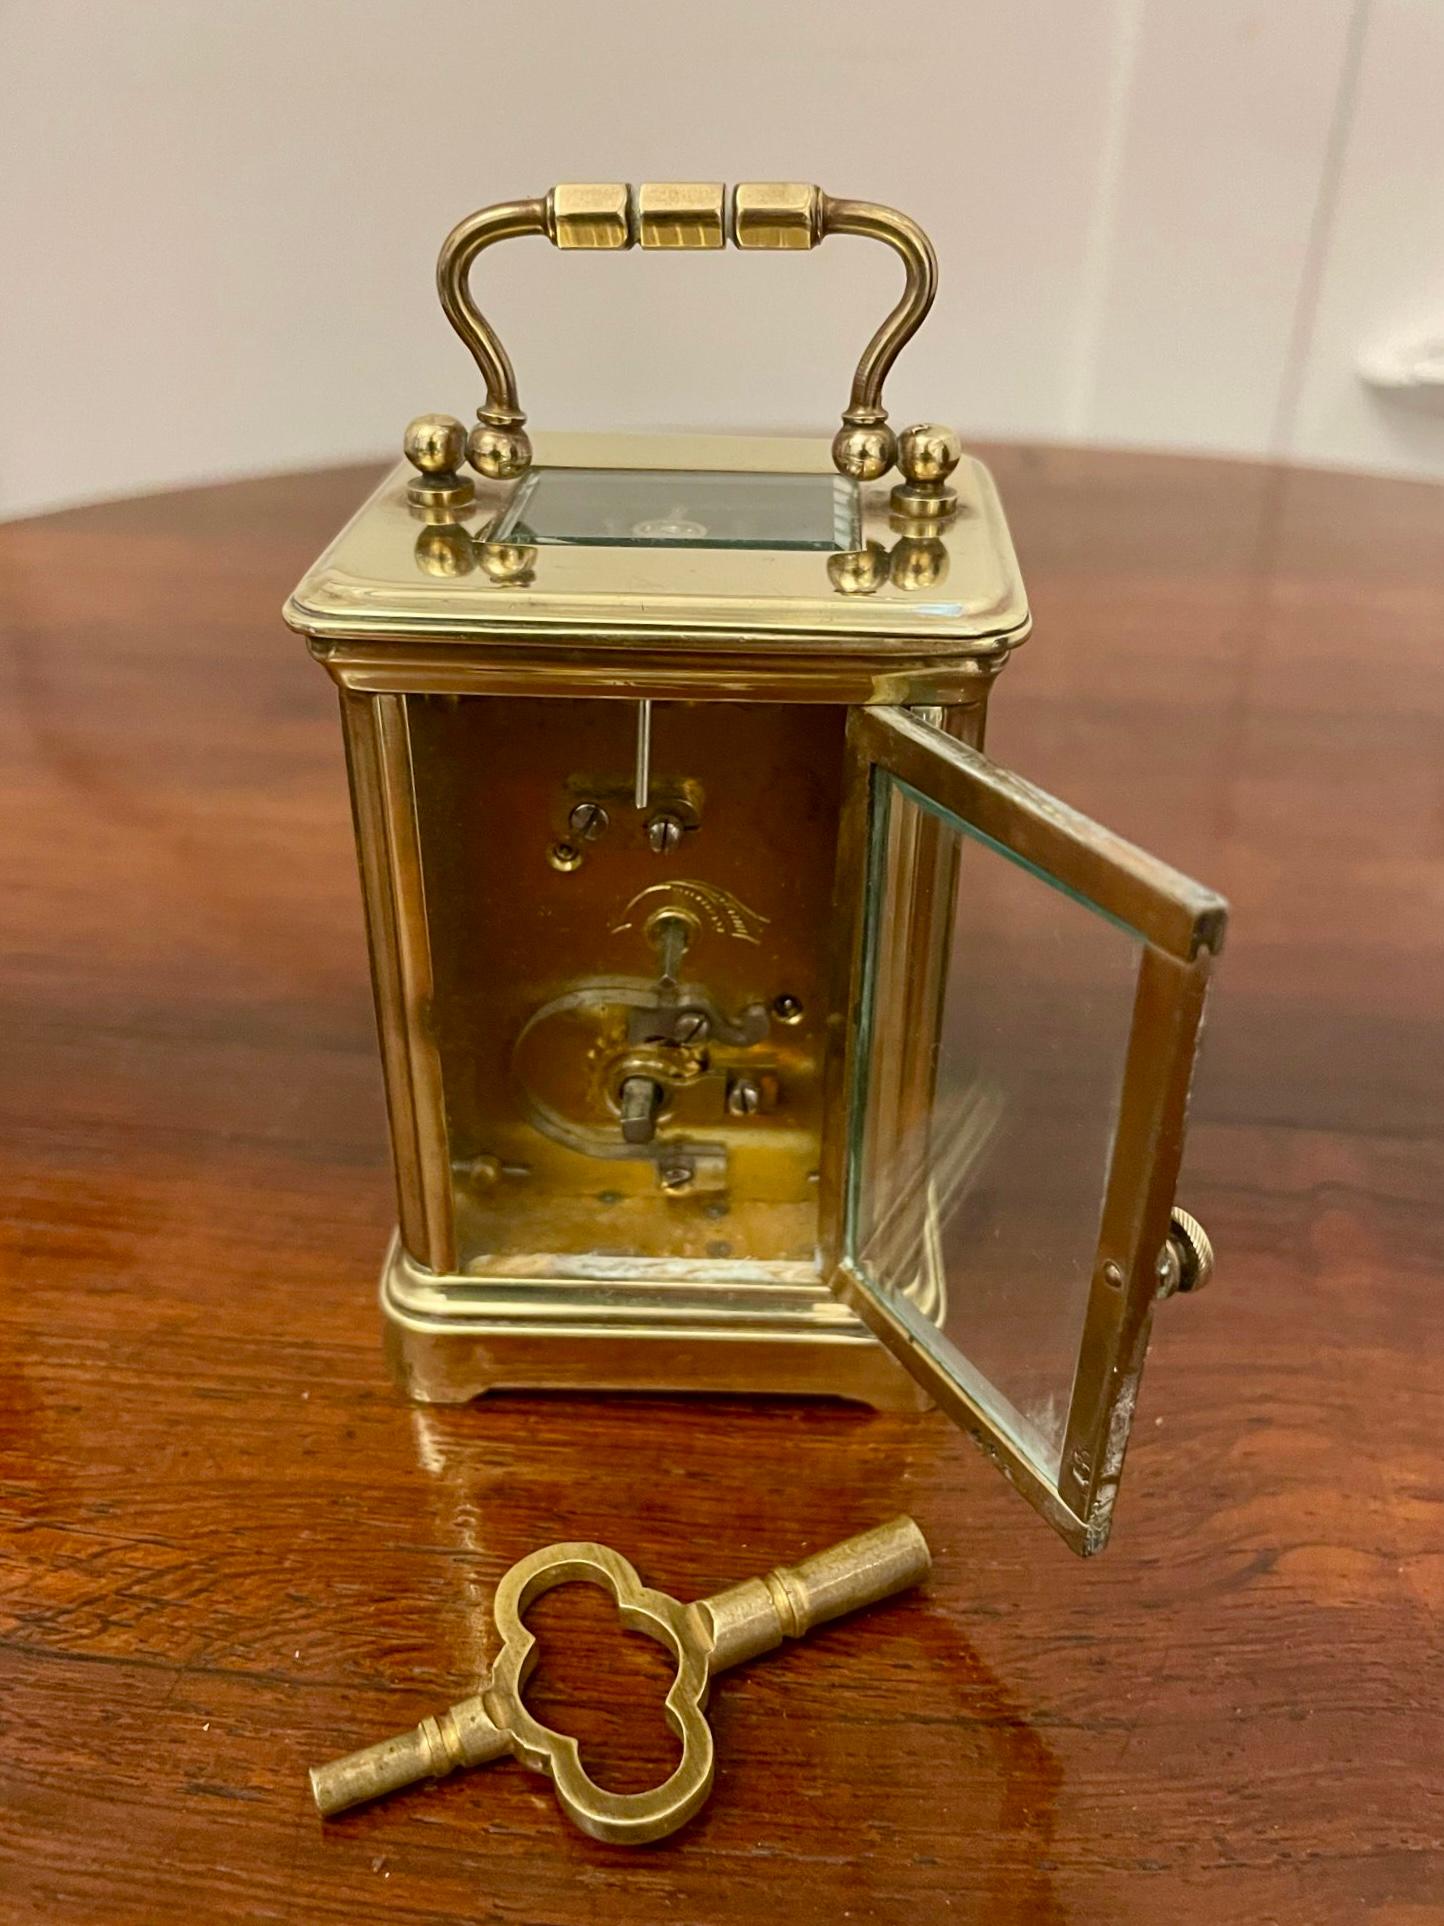 Antique Edwardian quality miniature brass carriage clock by J C Vickery, London having a quality brass case with bevelled edge glass, white enamel dial with original hands, 8 day French movement with original key and in perfect working order


A